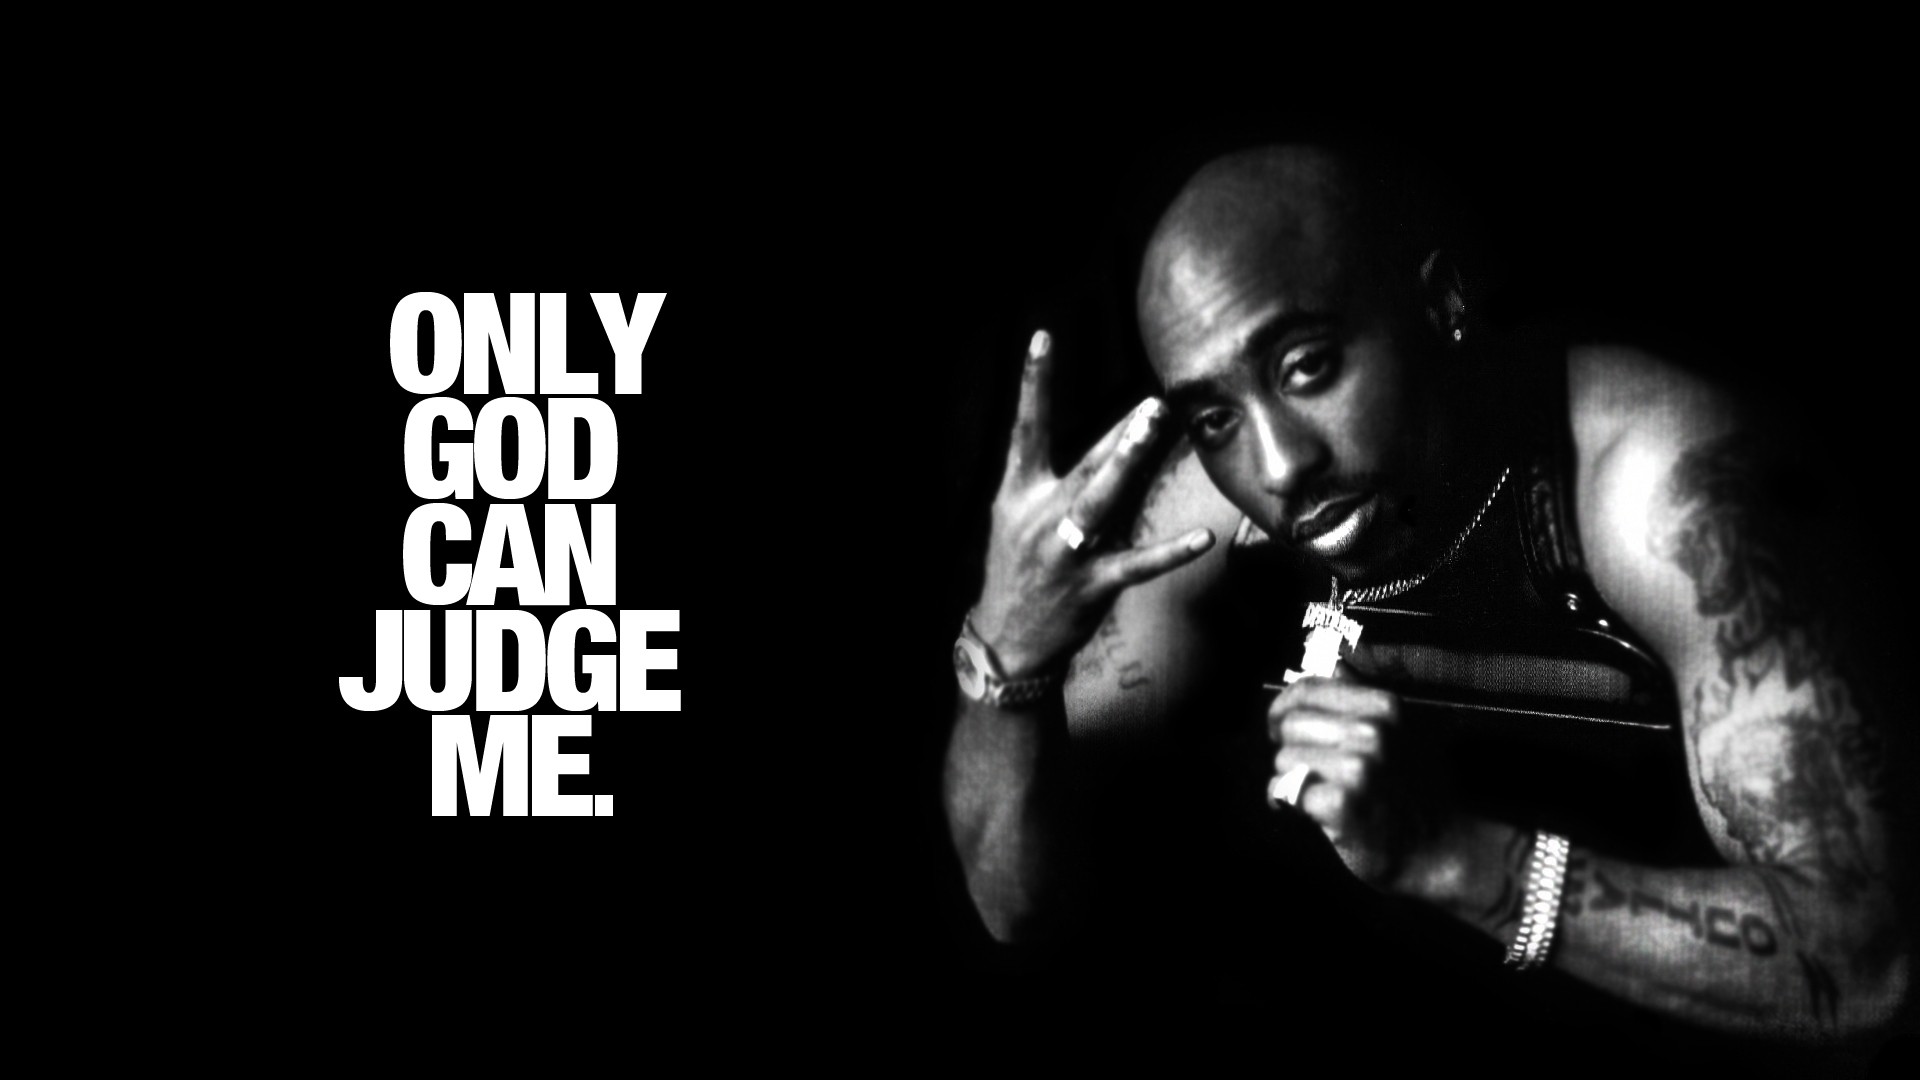 Tupac Quotes Wallpaper Hd Resolution, Awesome Wallpaper - Tupac Wallpaper Hd - HD Wallpaper 